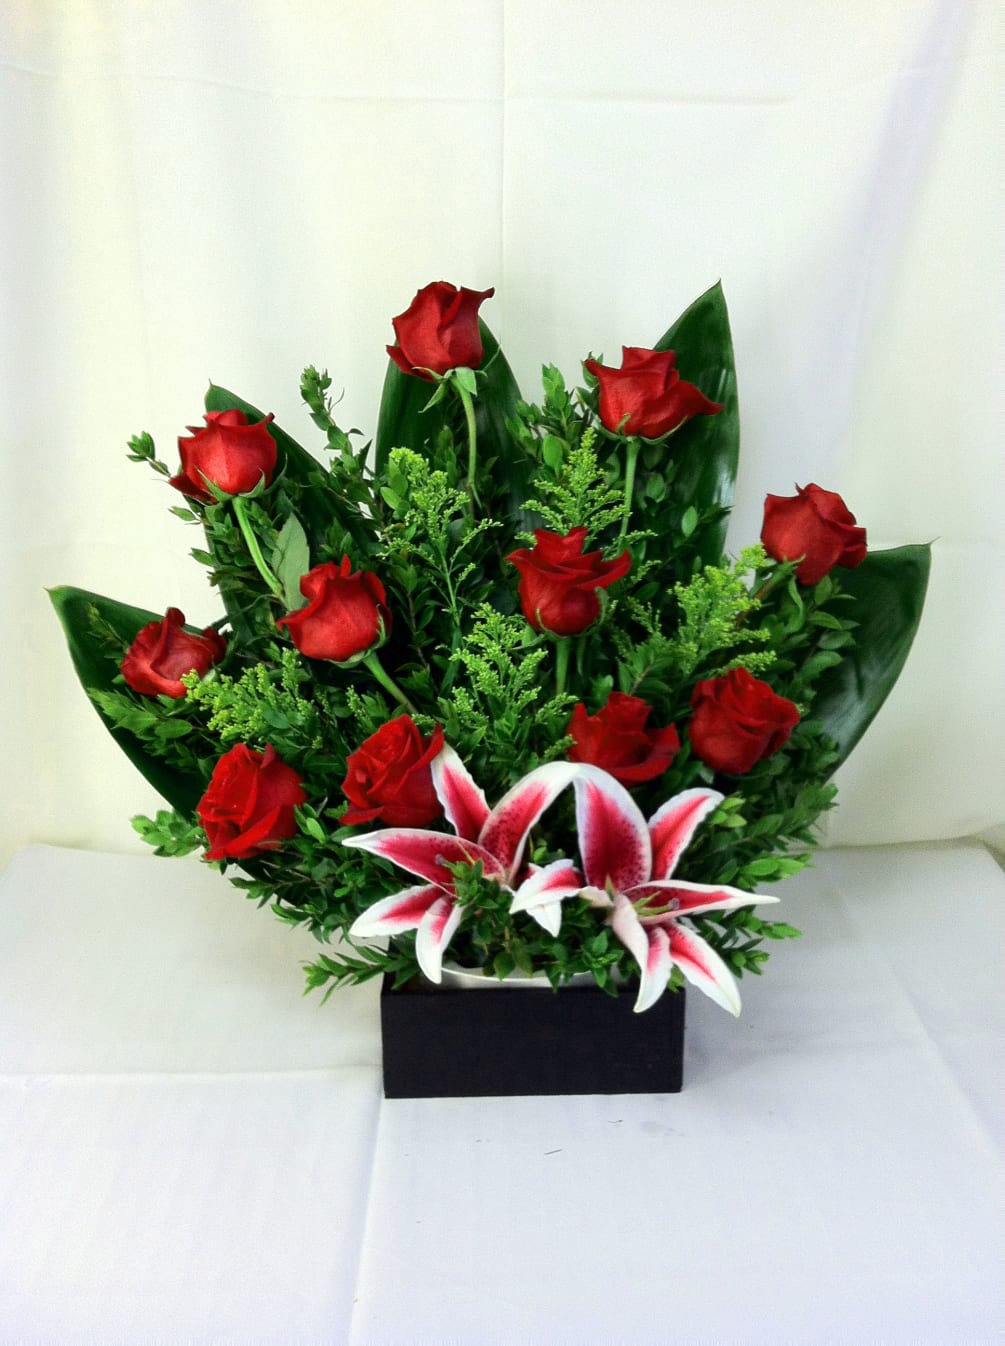 Cherish someone special by presenting a unique assortment of flowers and colors.